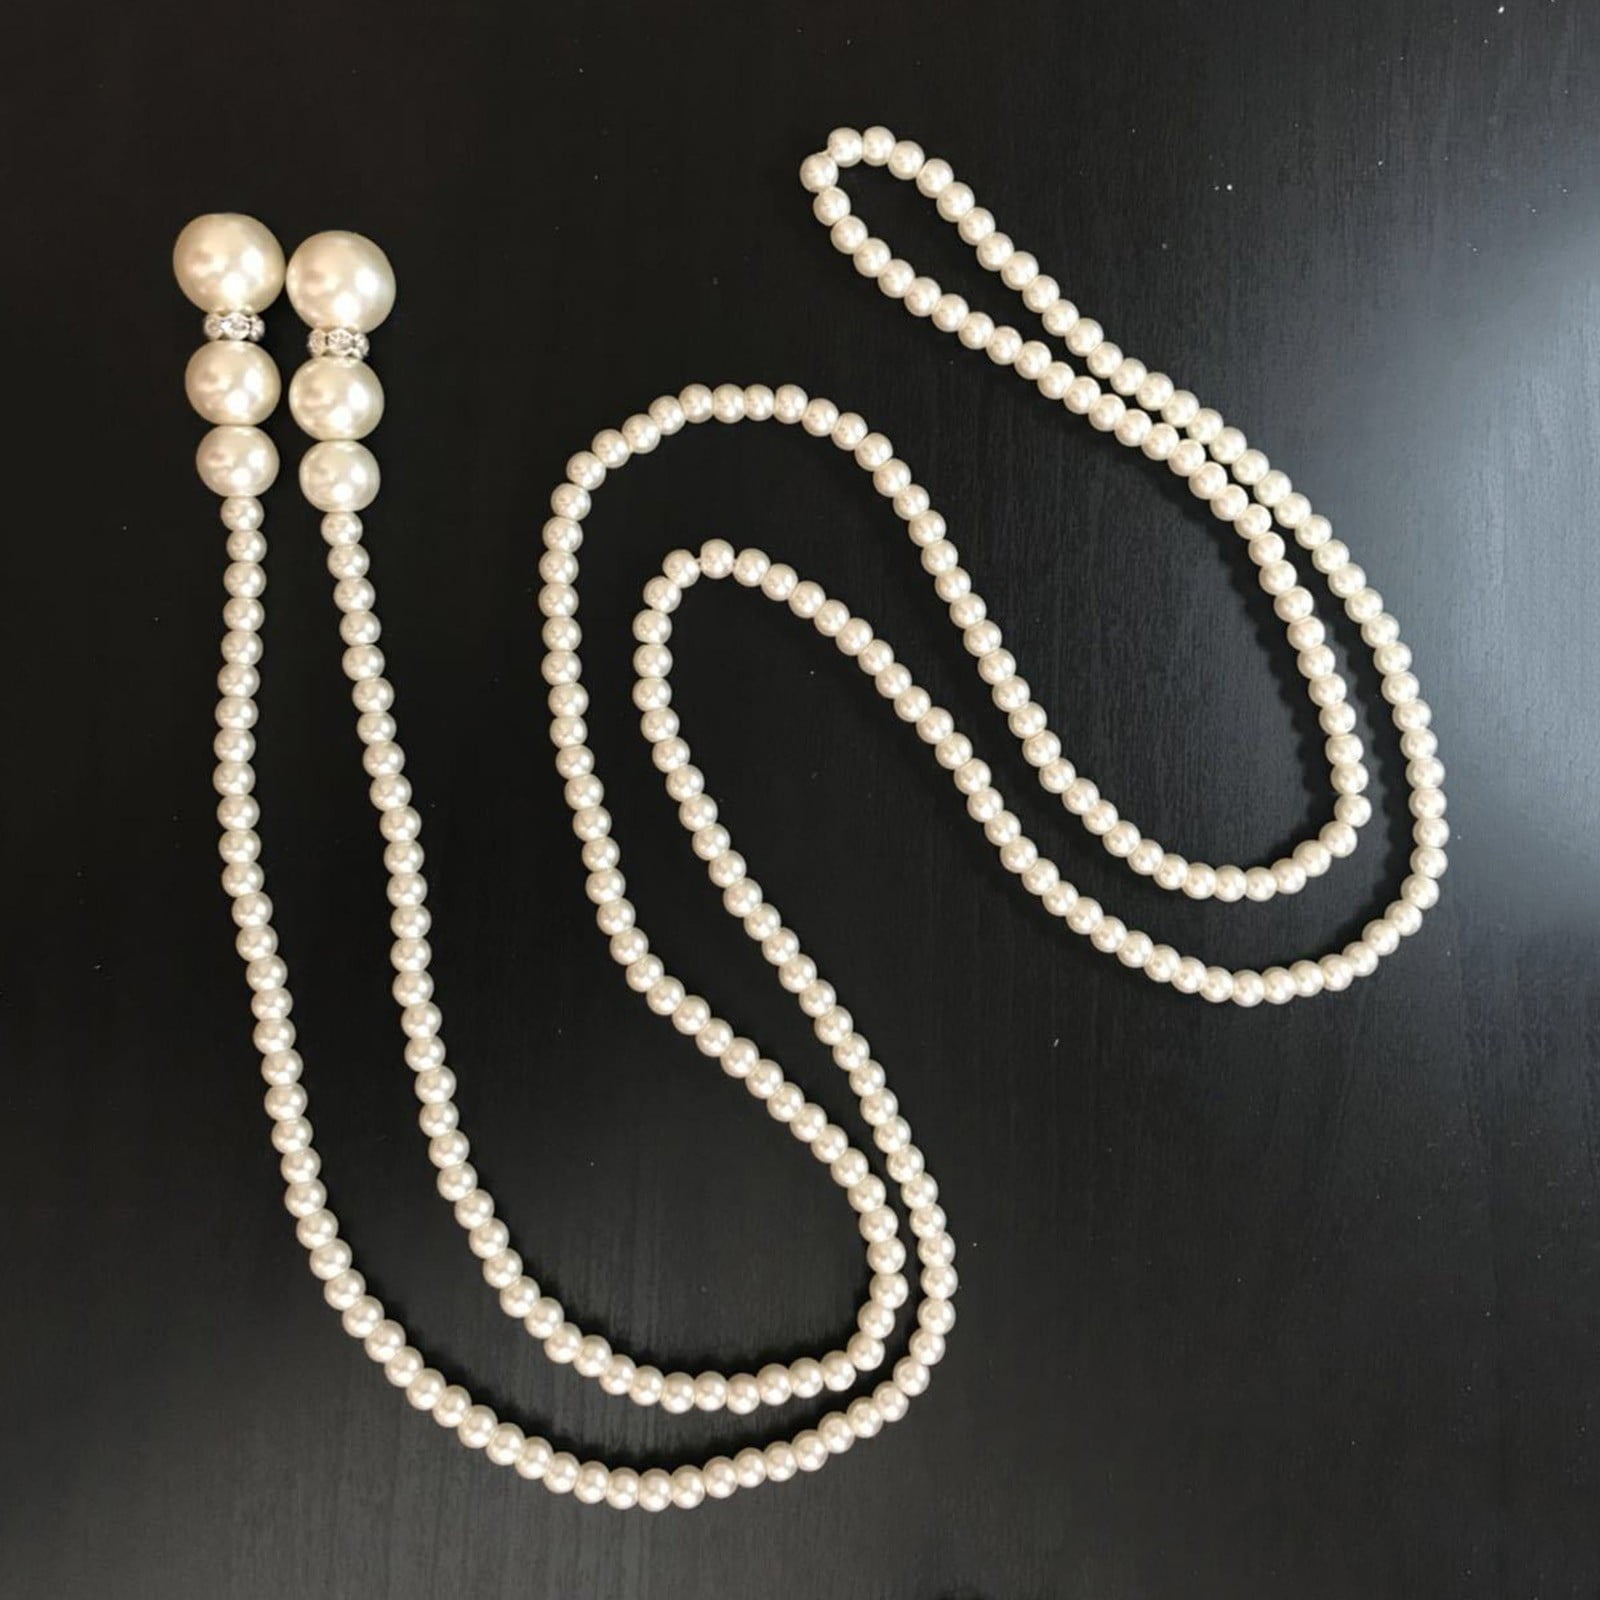 Tudacvte 1920s Accessories Pearls Necklace